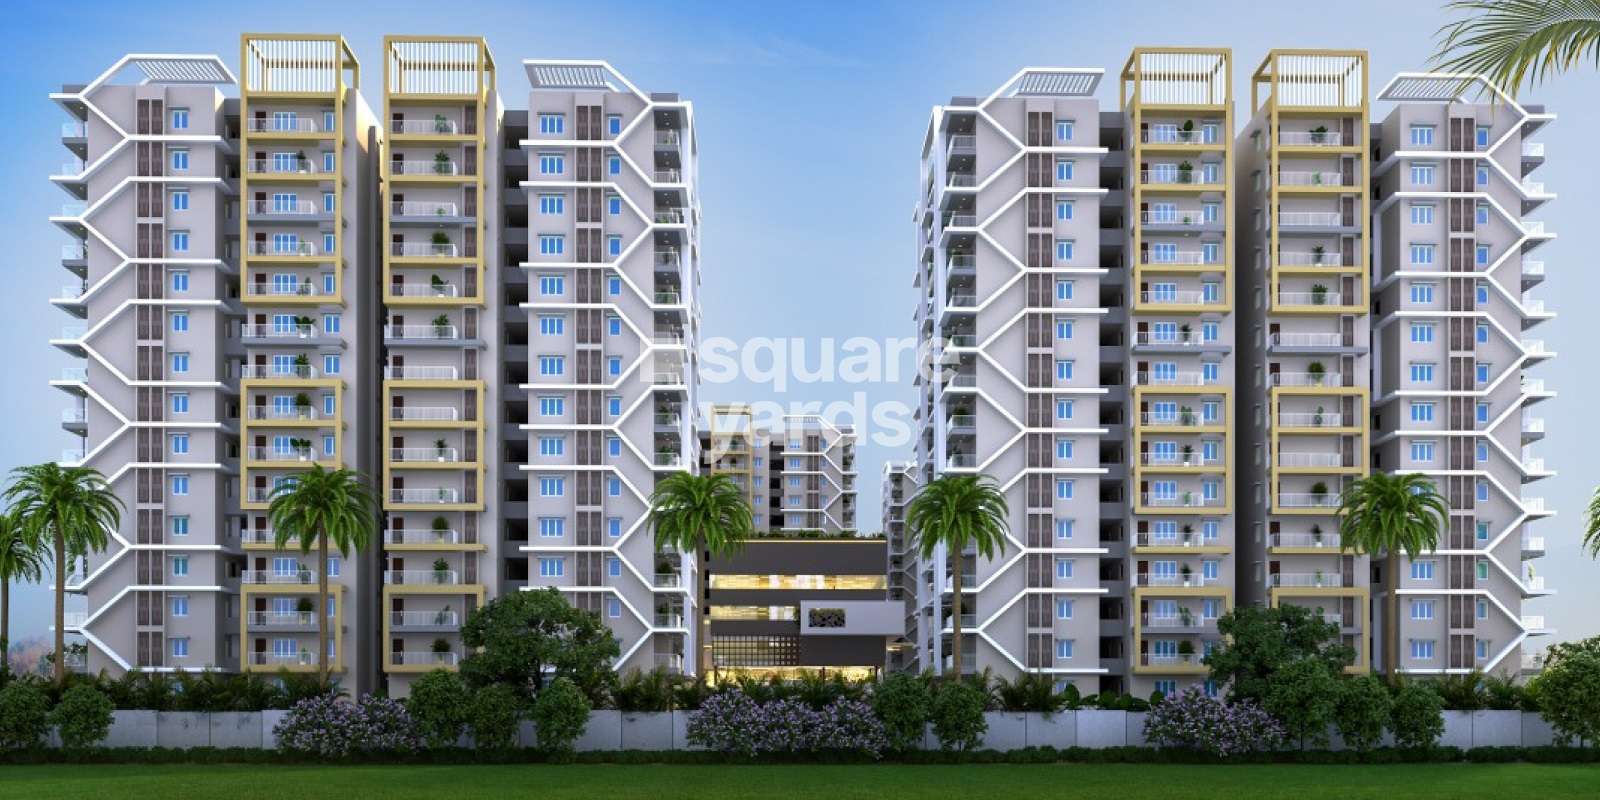 Aaditris Empire Apartments Cover Image